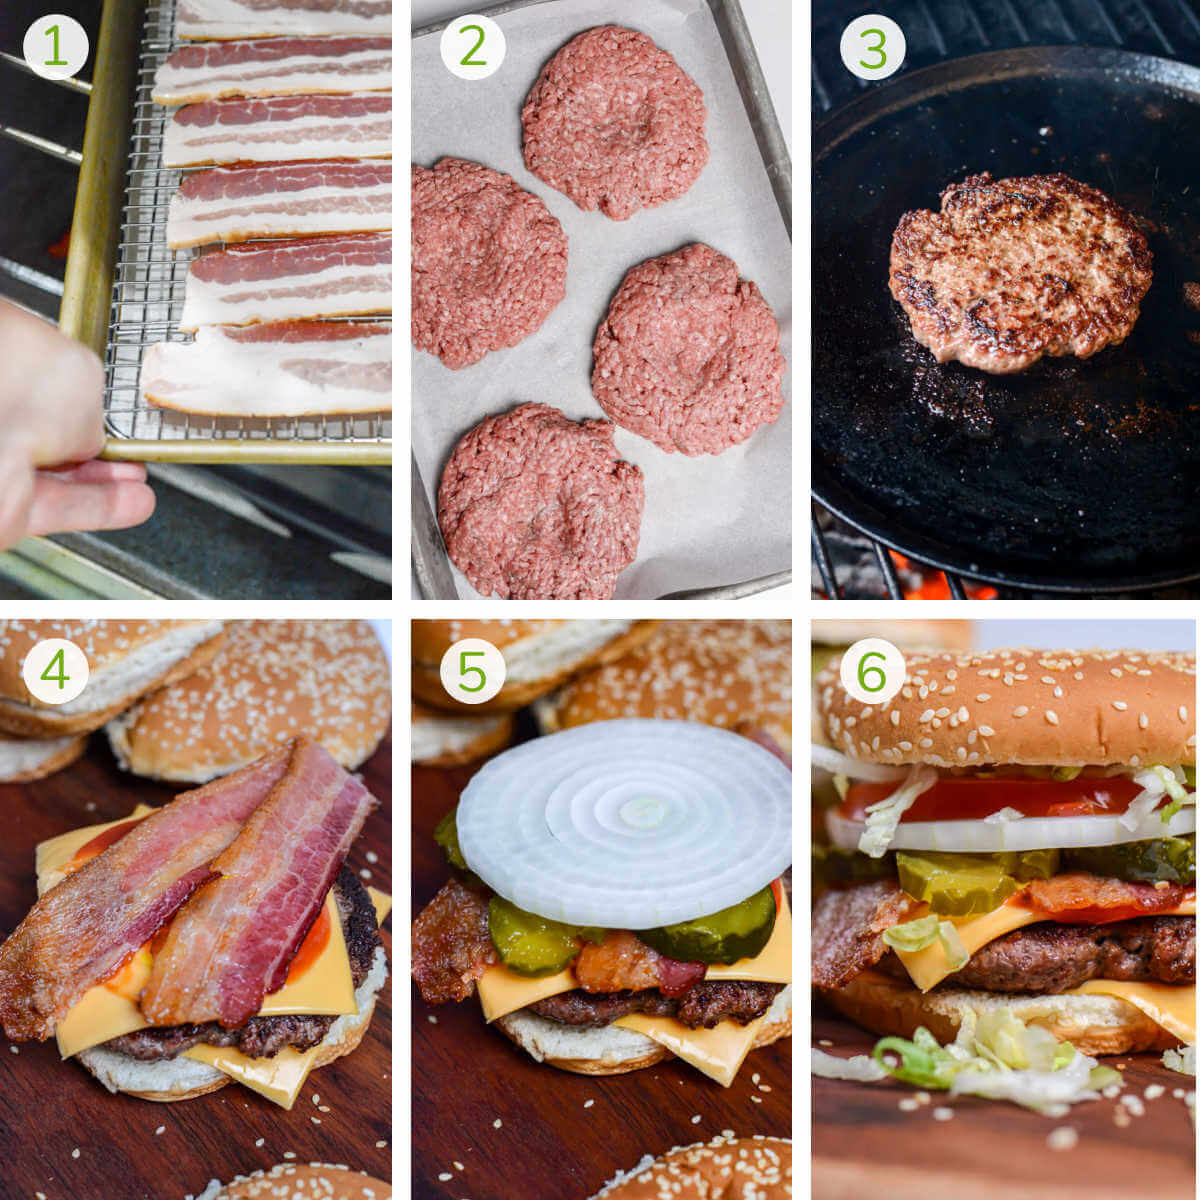 instruction photos showing how to cook the bacon, prepare the patty, and assemble the burger.